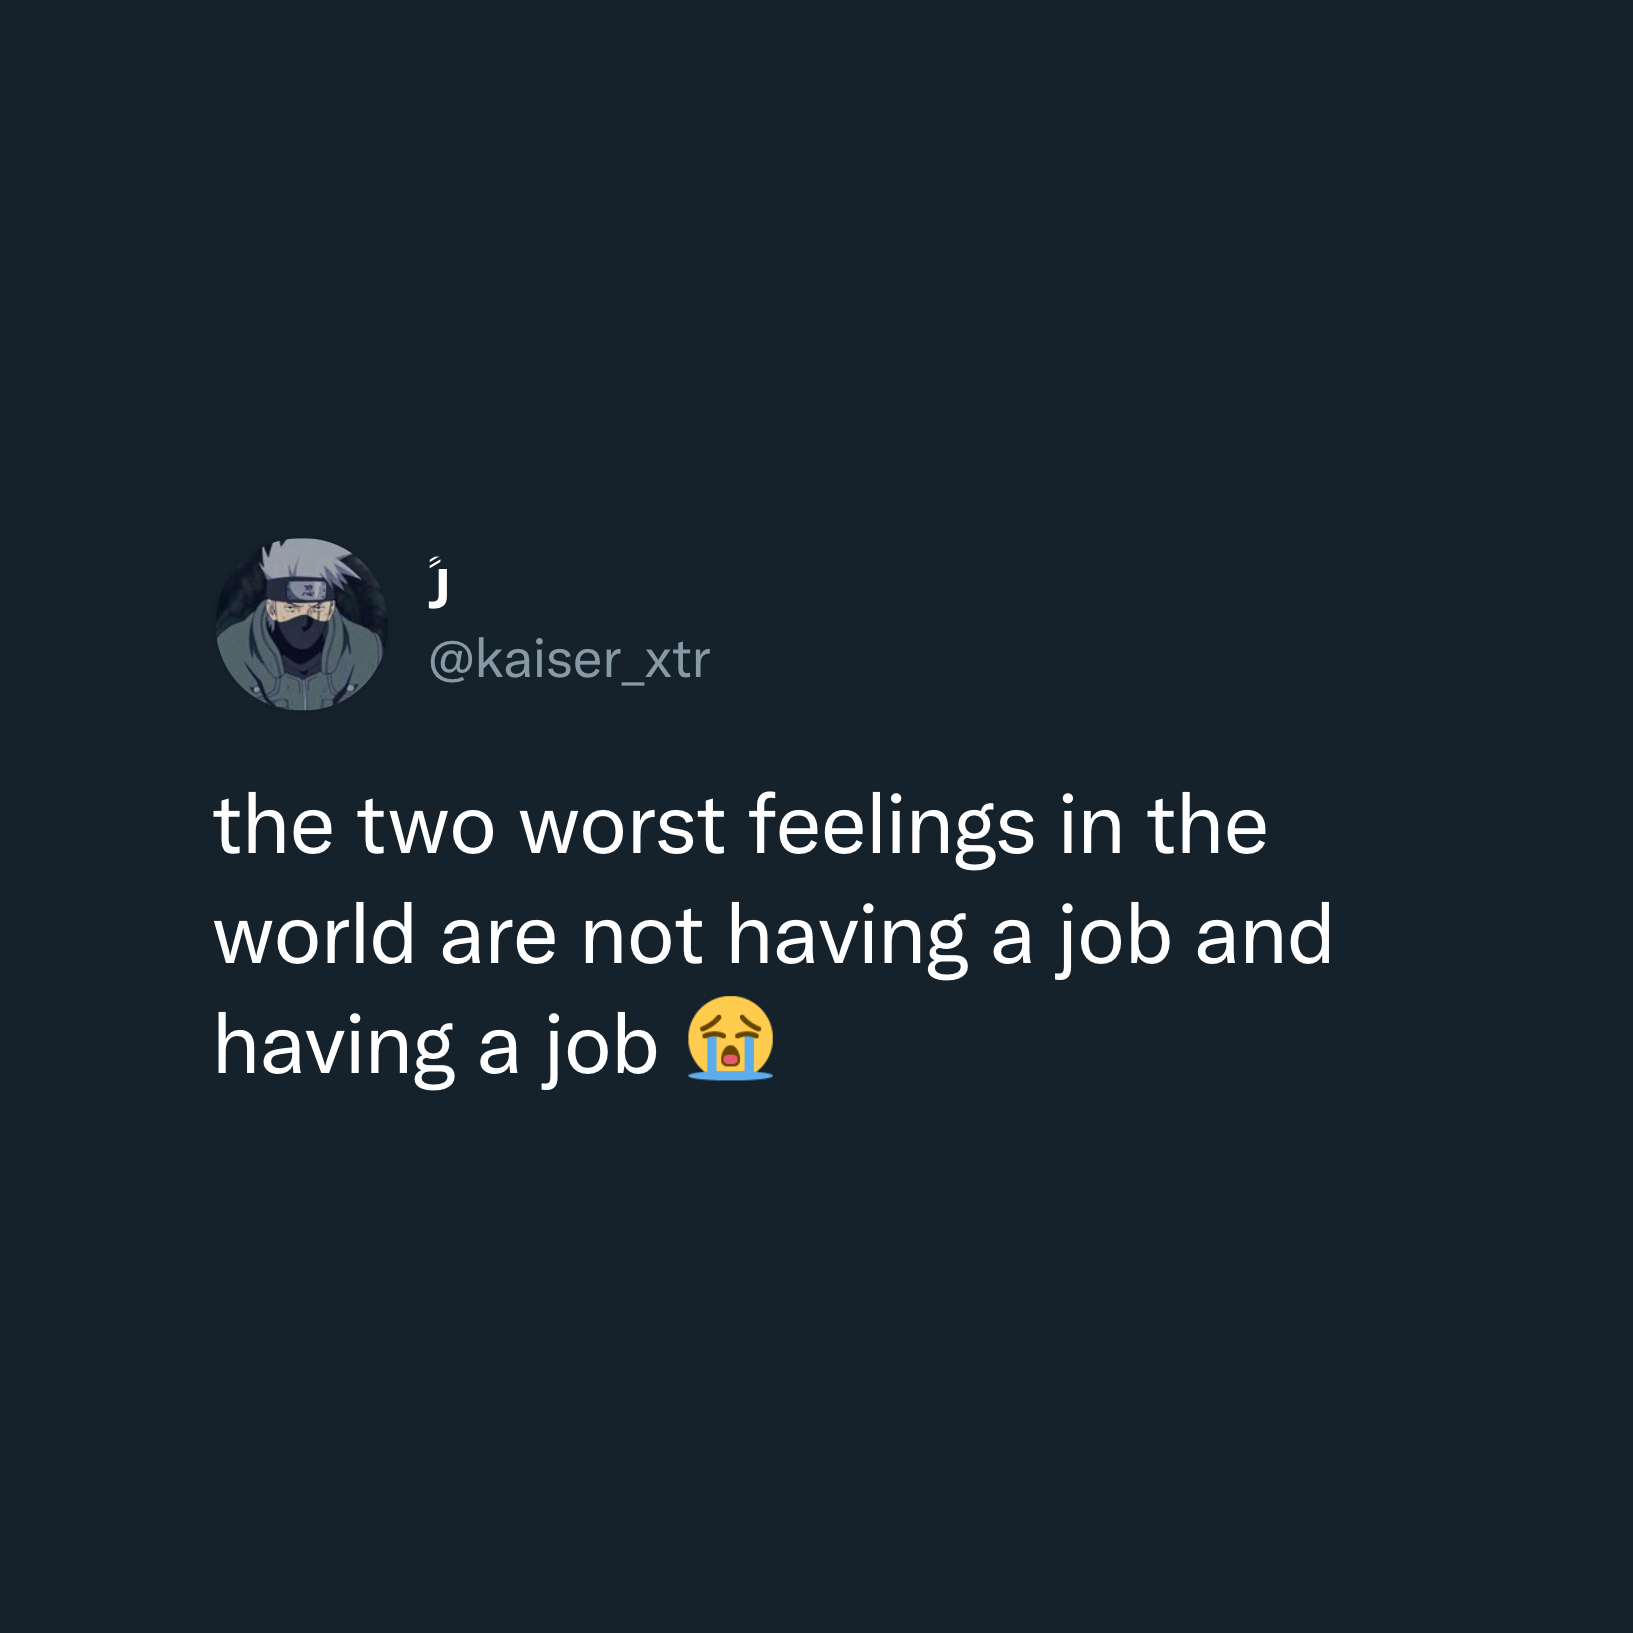 work meme - the two worst feelings are having a job and not having a job